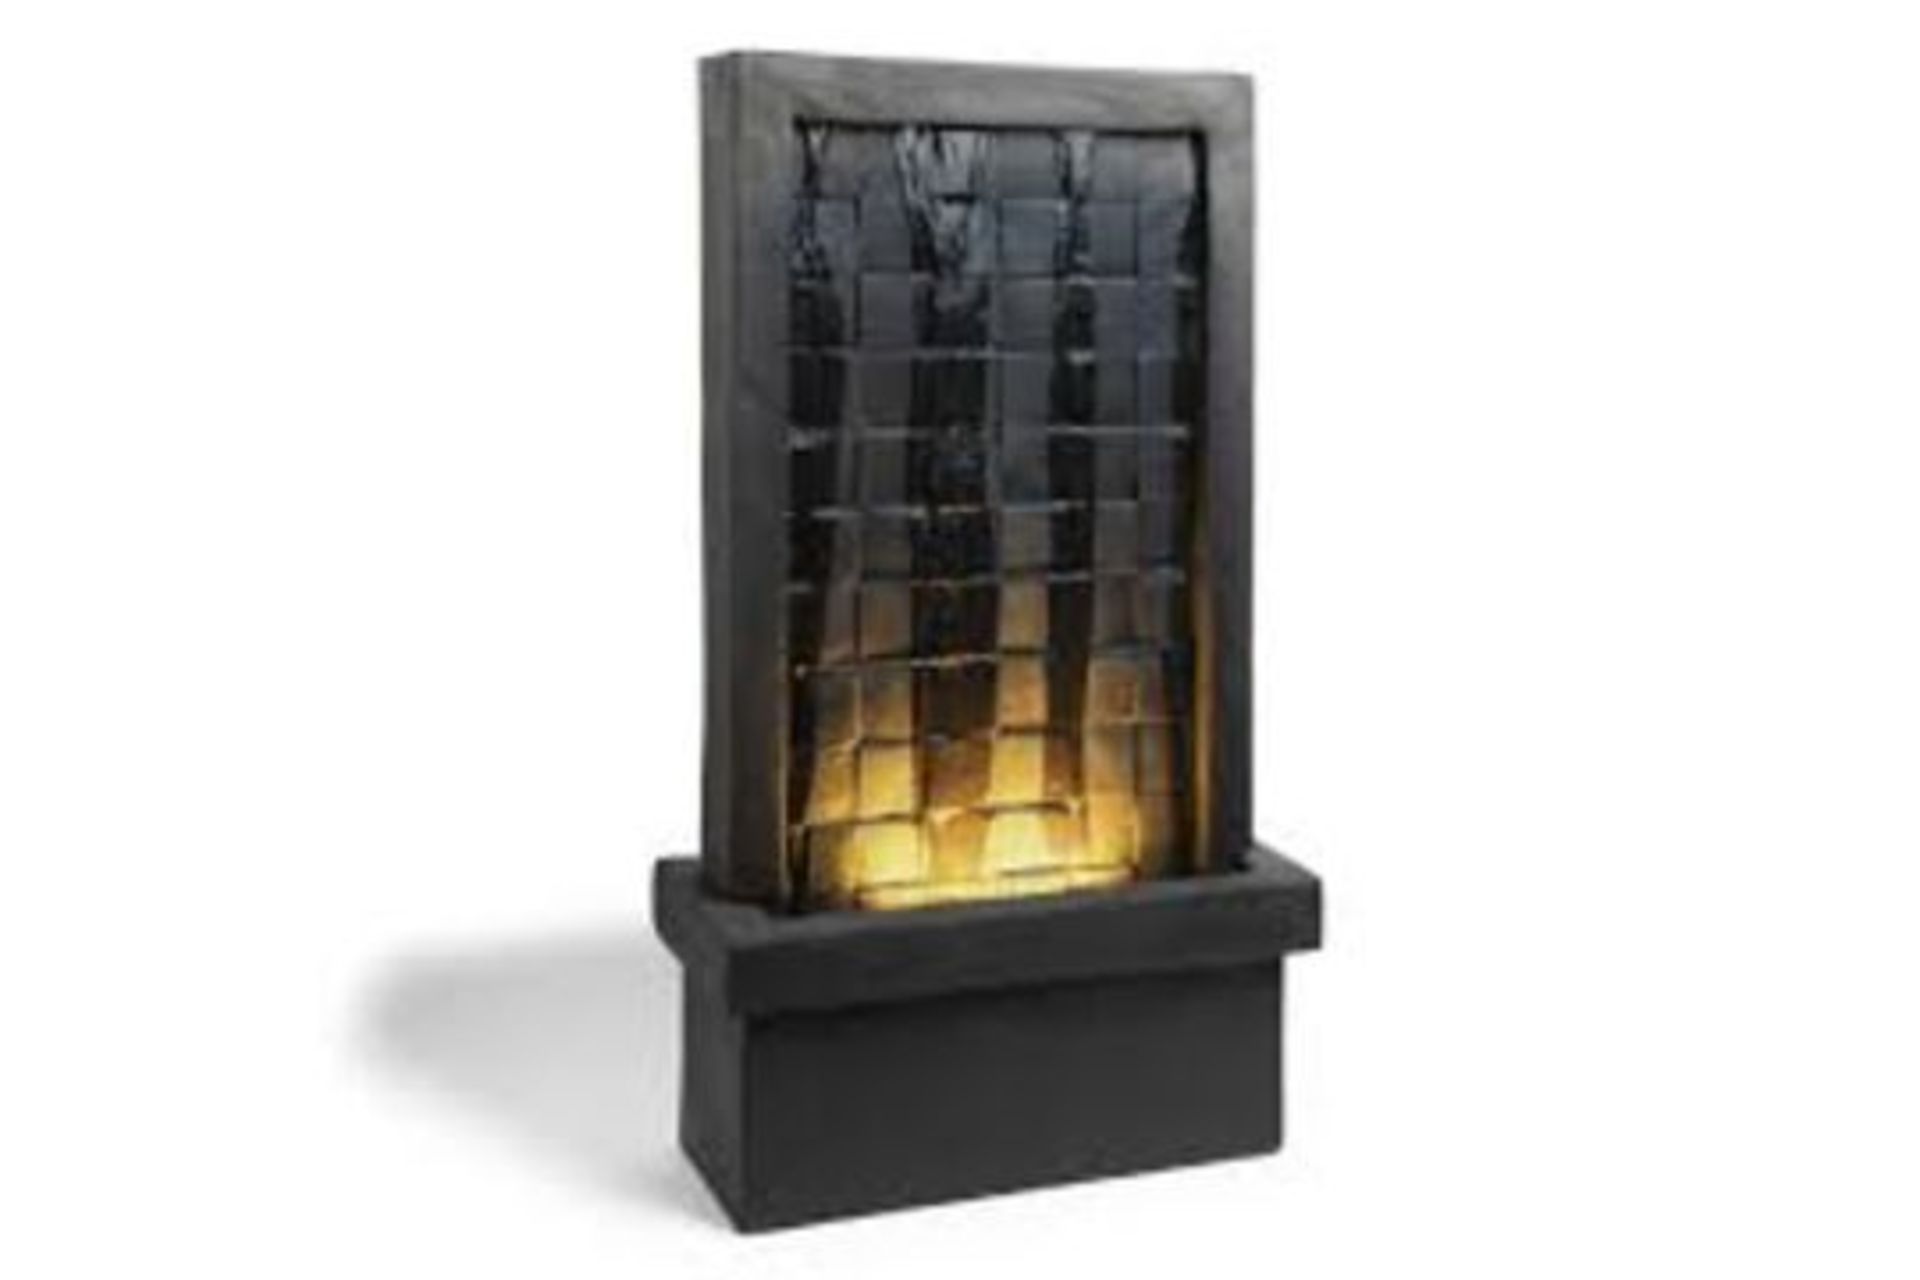 New & Boxed Tiled Waterfall Water Feature - Tall LED Wall Lit Cascading Water Fountain. RRP £349.99.